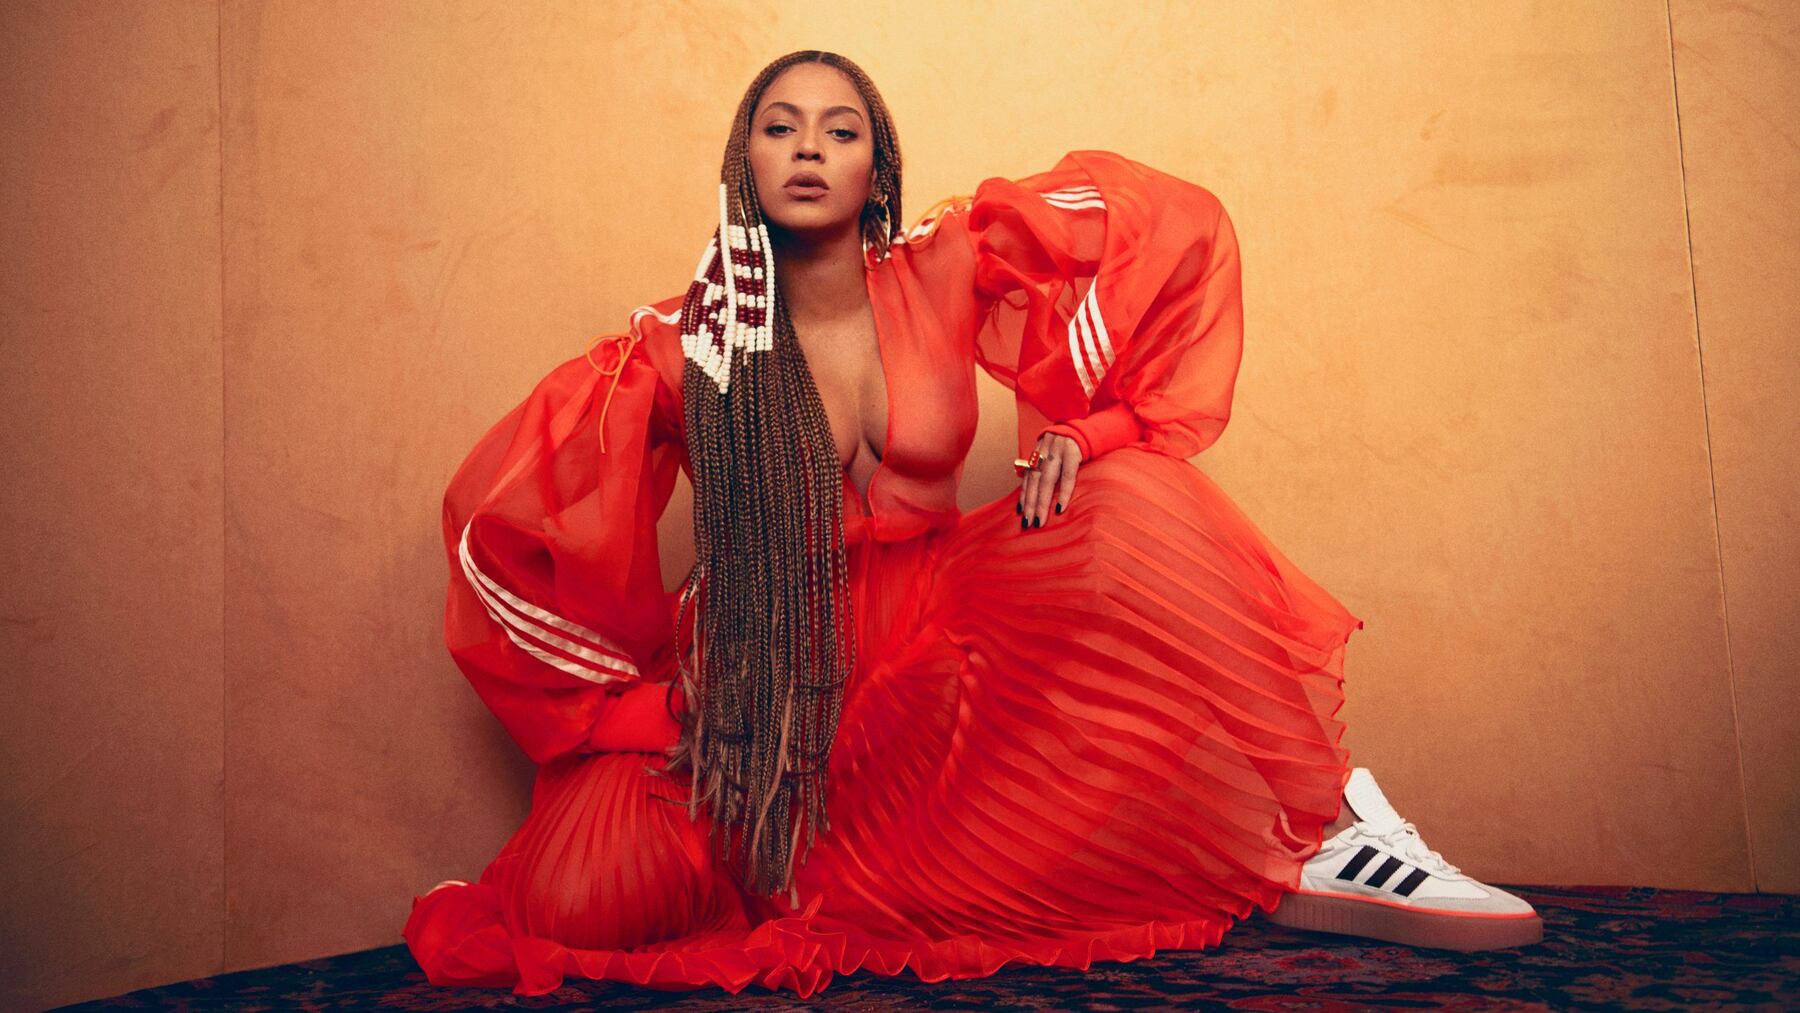 CAA has helped broker fashion deals for many of its clients, including Beyoncé. Adidas.